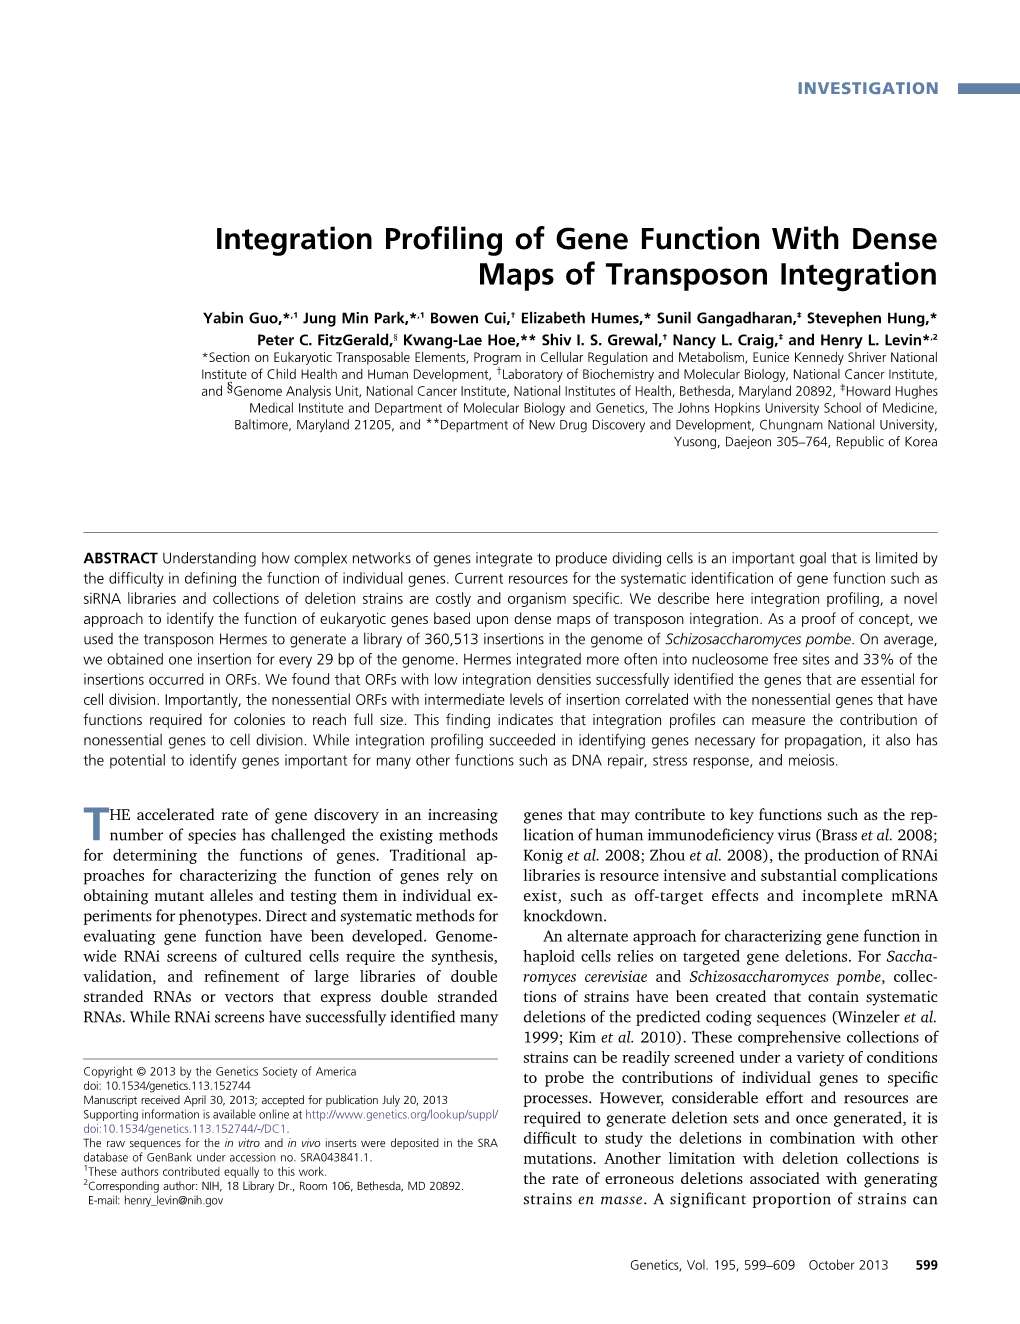 Integration Profiling of Gene Function with Dense Maps of Transposon